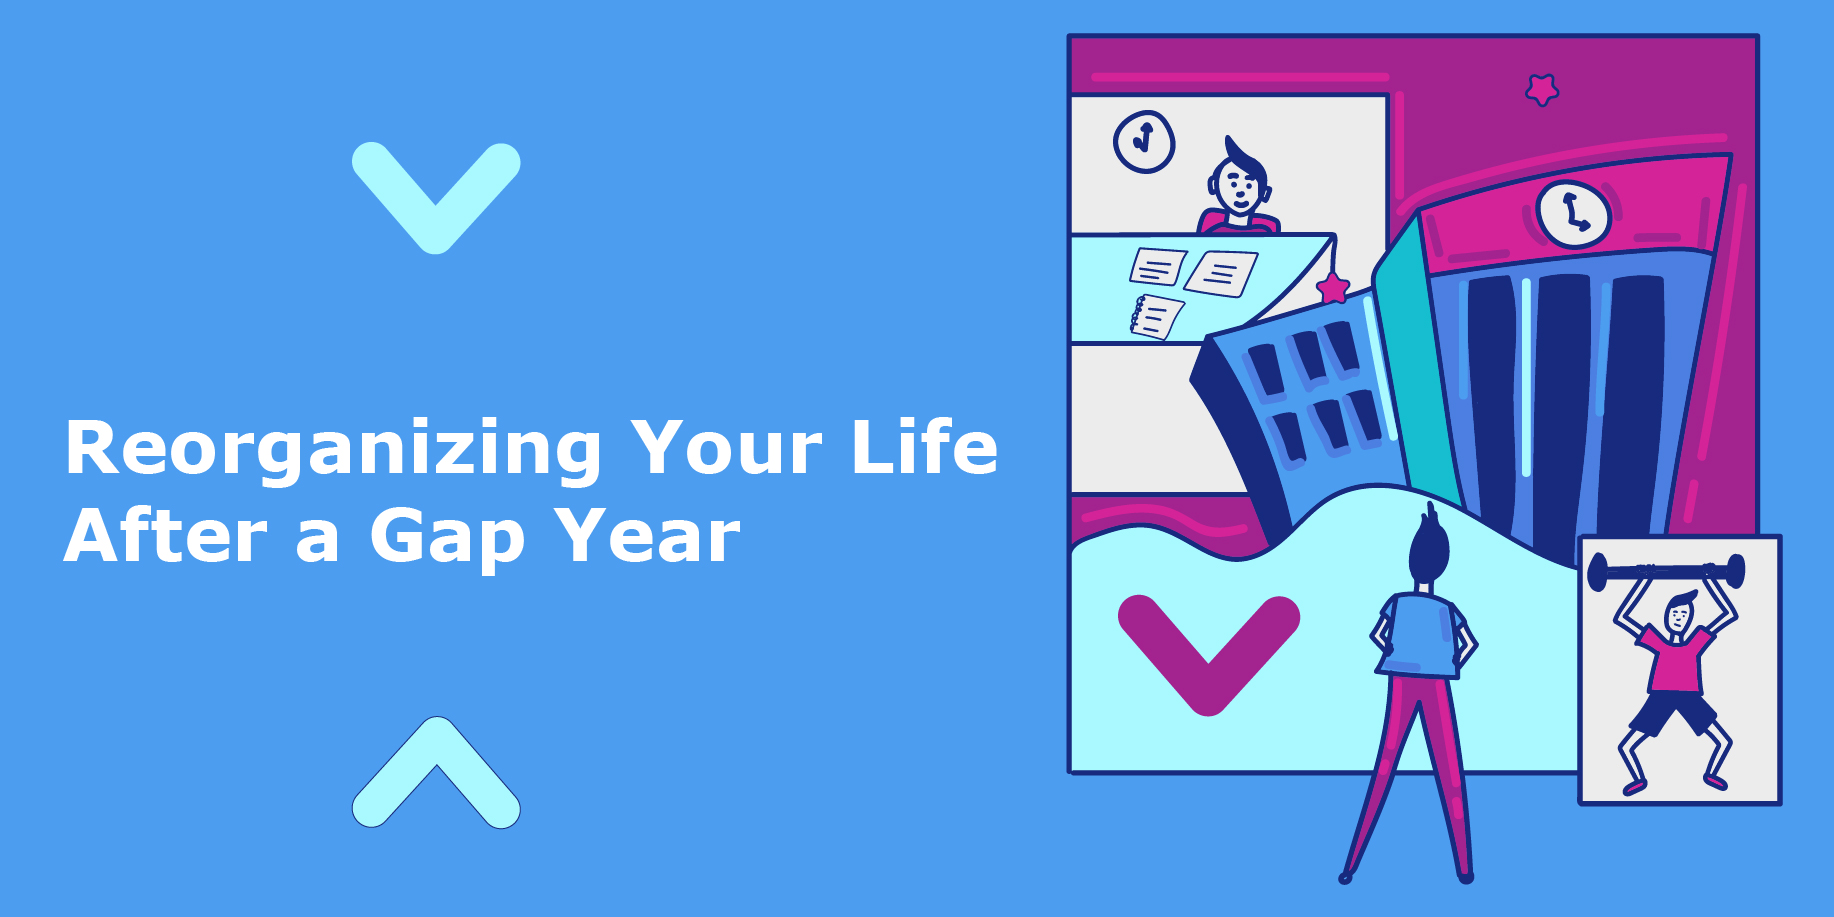 Reorganising Your Life After a Gap Year